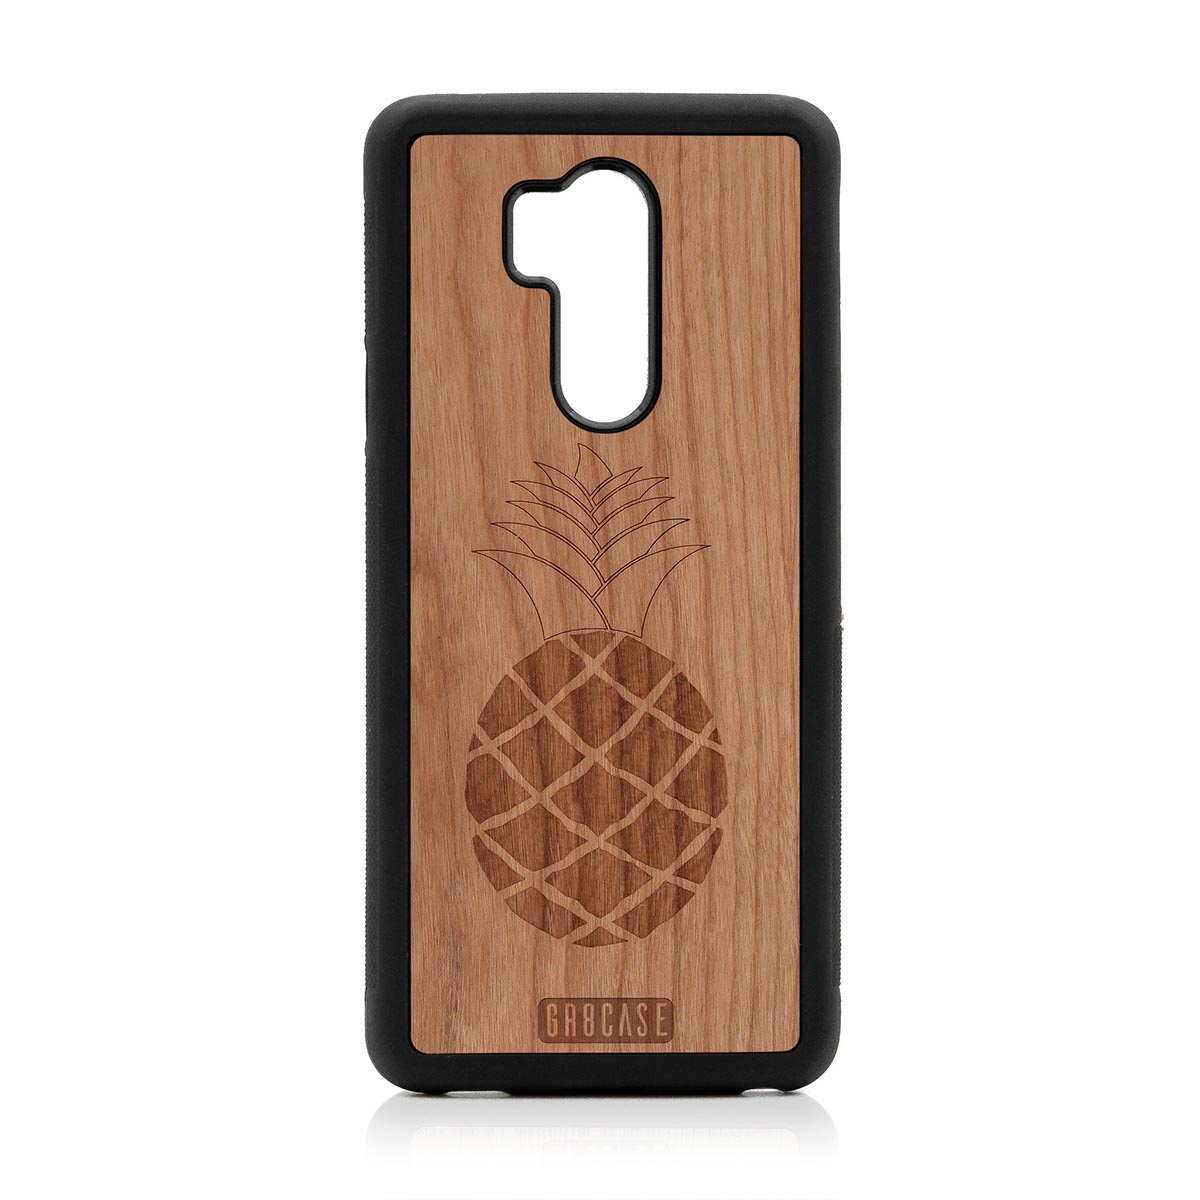 Pineapple Design Wood Case LG G7 ThinQ by GR8CASE